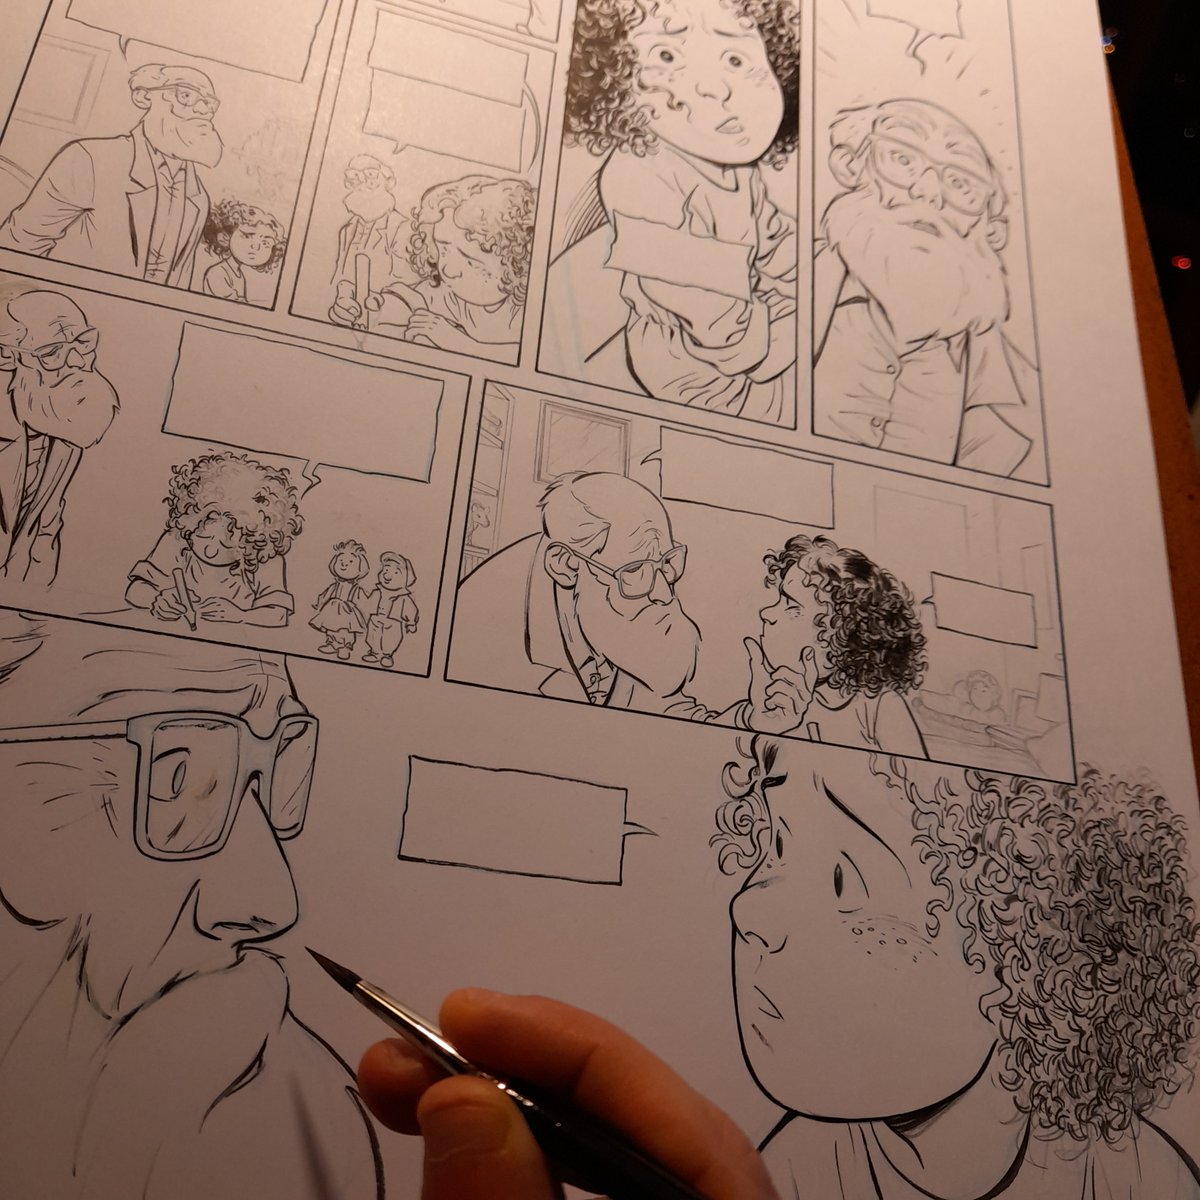 Looking into each other eyes... Ink in progress. Script by: Kris For: Editions Glénat . #glénat #comics #comicbooks #ComicArt #ink #brush #art #drawing #draw #artistsontwitter